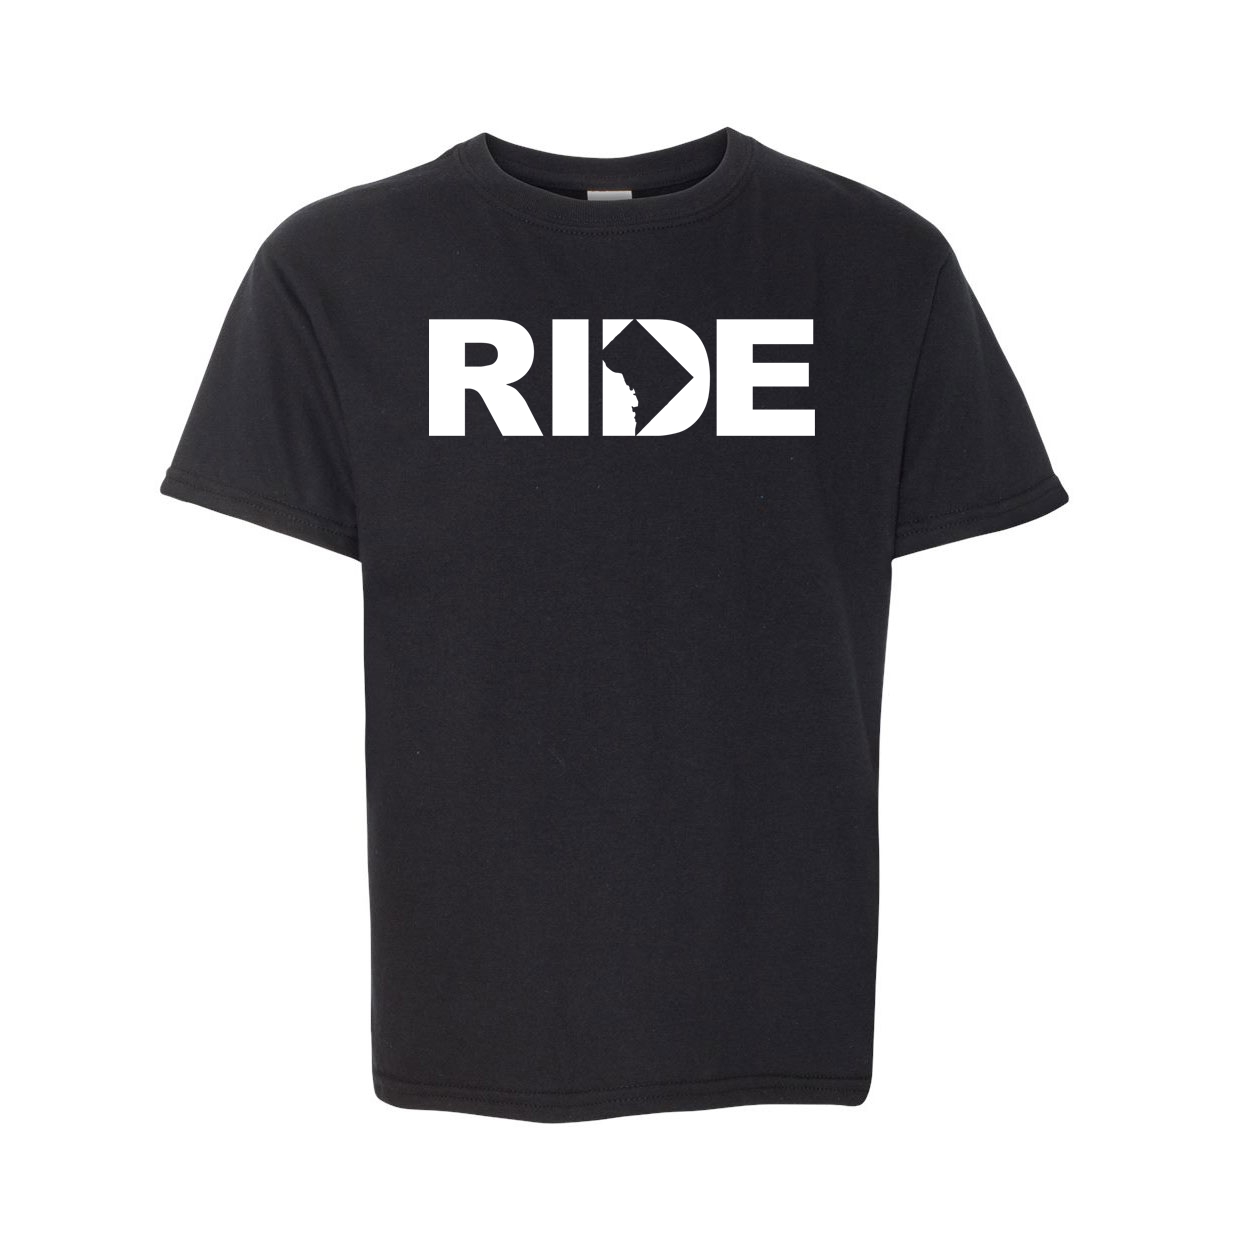 Ride District of Columbia Classic Youth T-Shirt Black (White Logo)